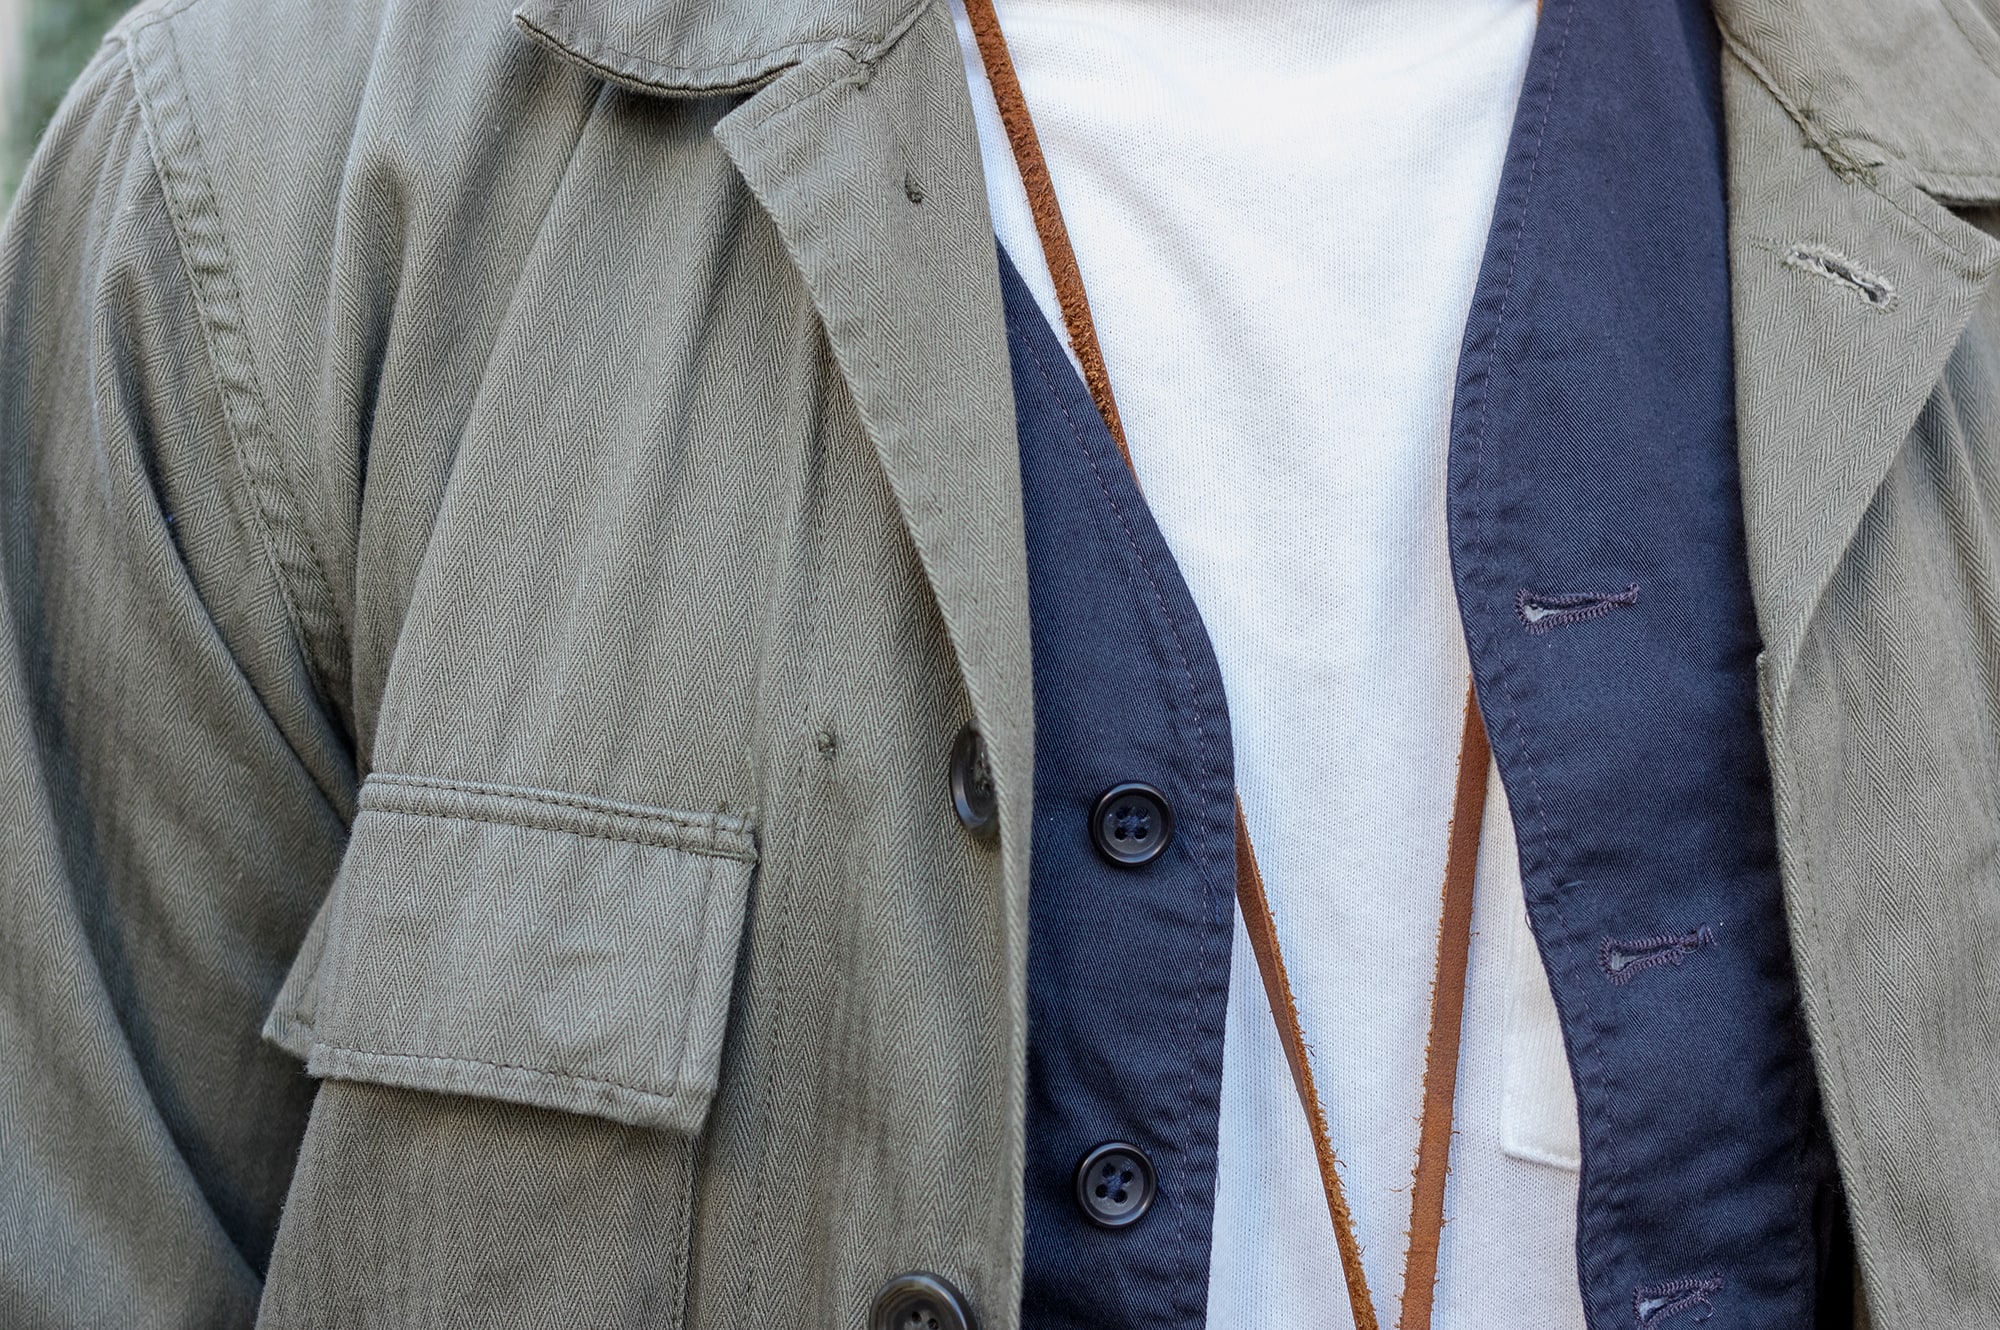 Engineered Garments BDU field jacket with a gilet inspired by C1 Ermergency Sustenance Vest and a jean from Phi denim